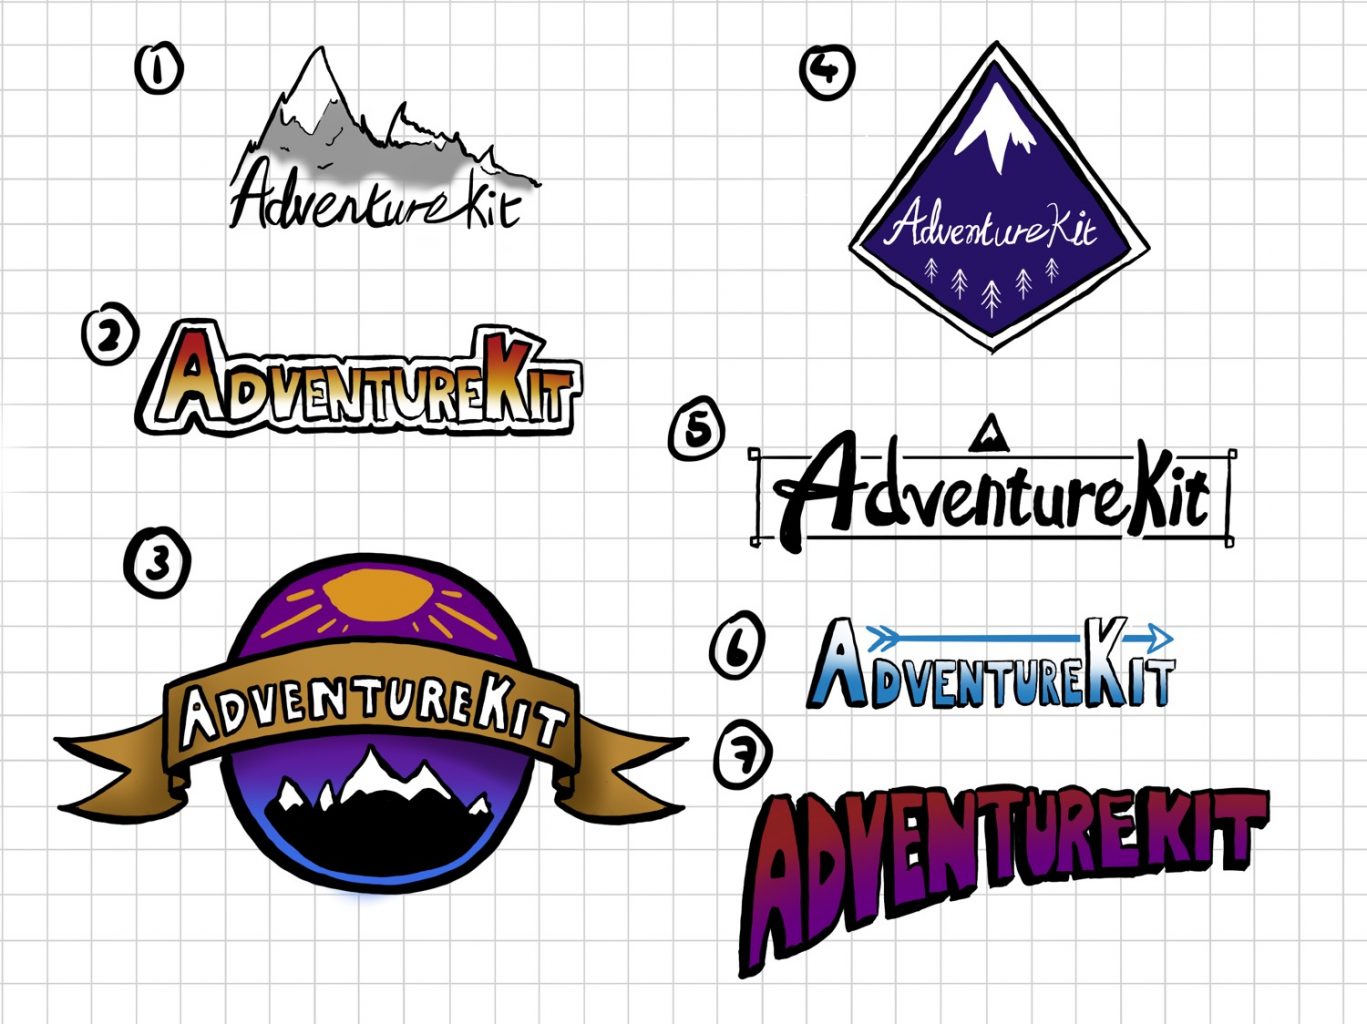 A group of seven colour sketches for AdventureKit logos arranged on a grid.